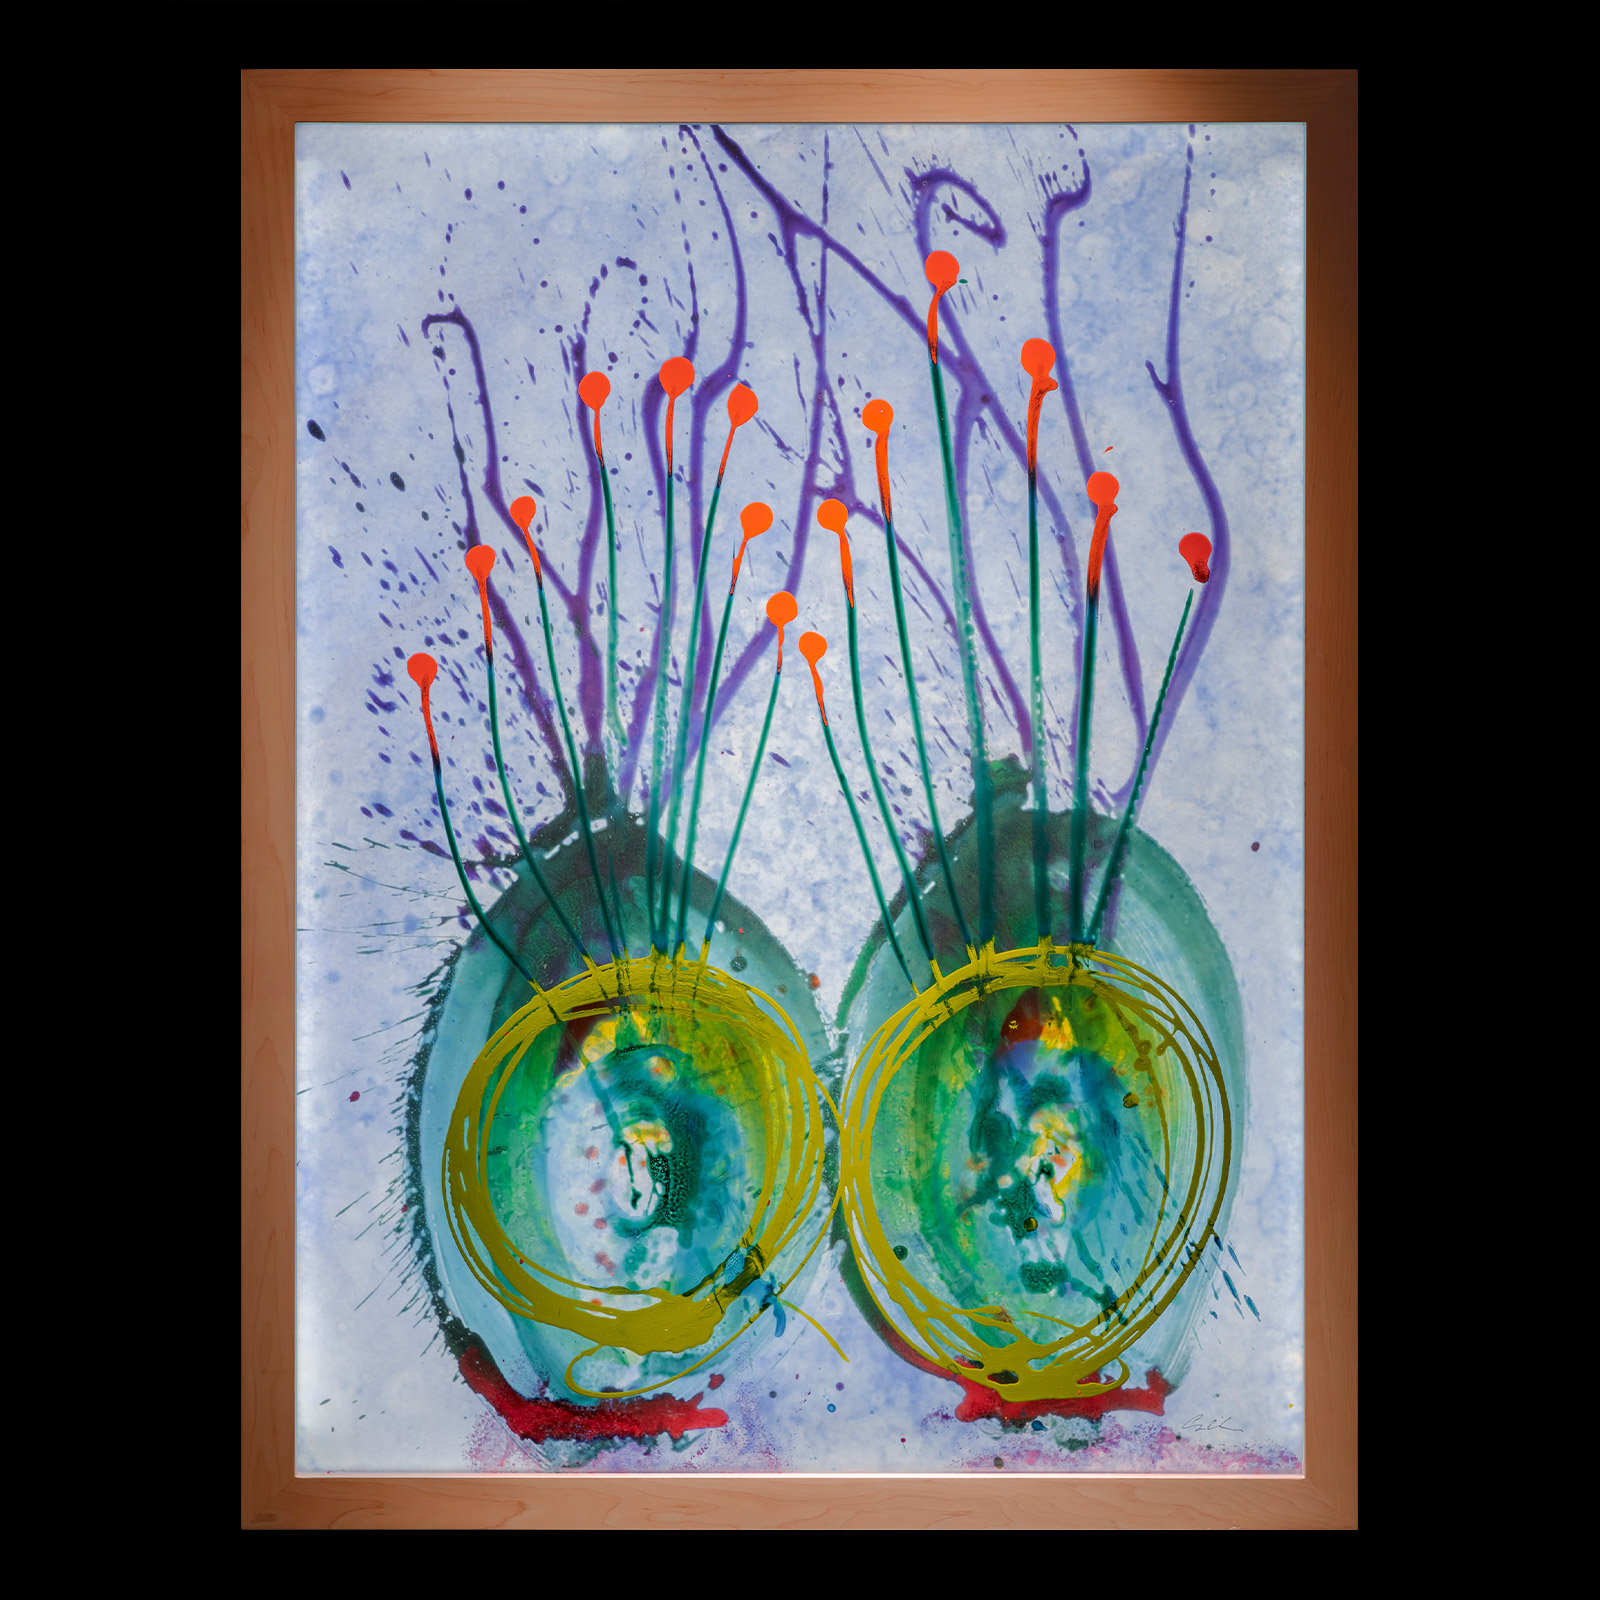 Ikebana Glass on Glass Painting, 2018 by Dale Chihuly